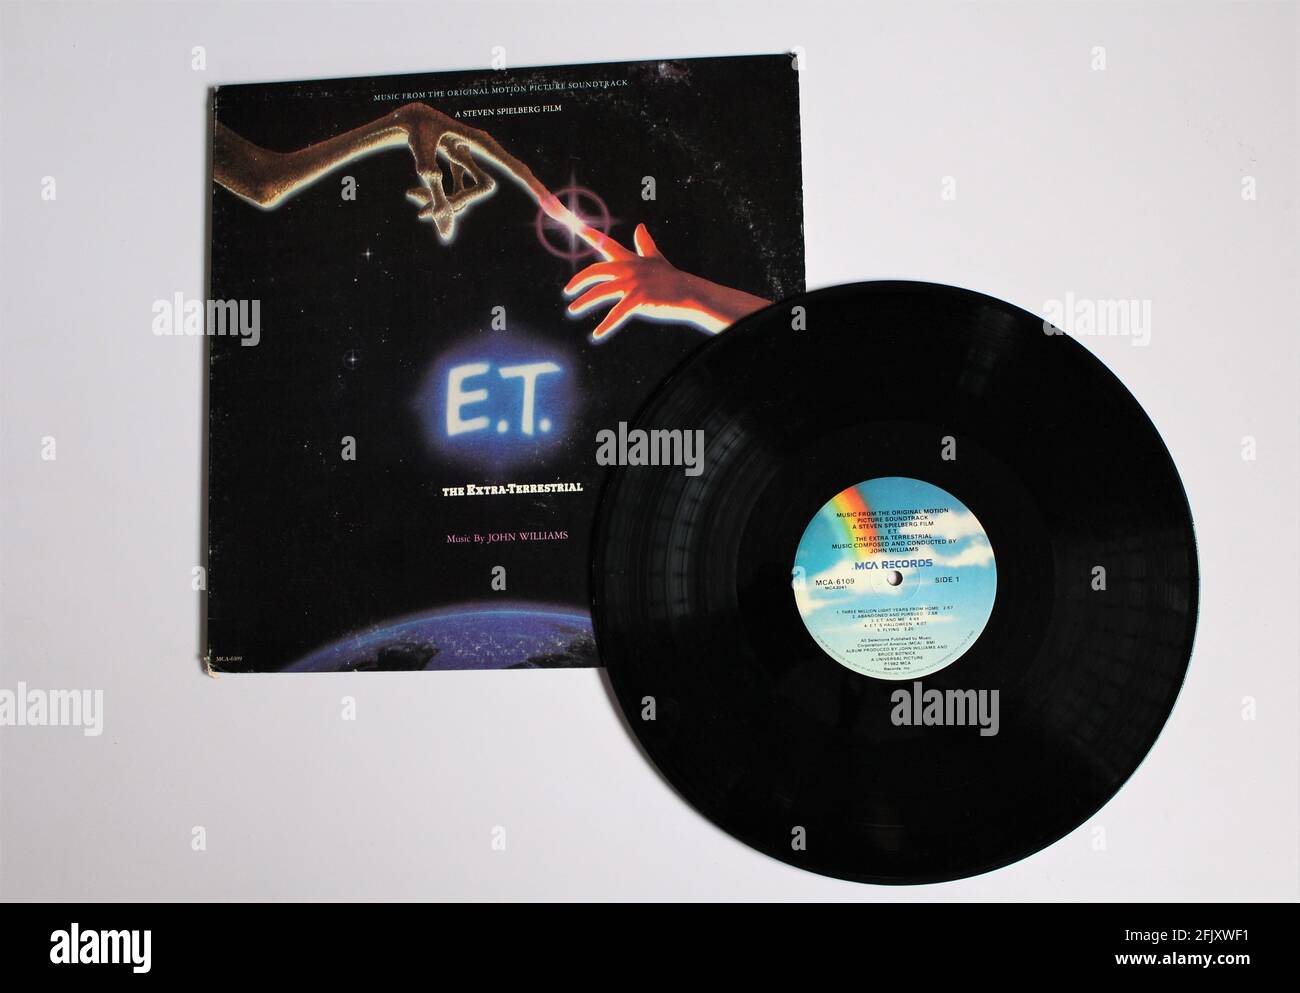 E.T. the Extra-Terrestrial soundtrack album on vinyl record LP disc for the 1982 blockbuster film by Steven Spielberg. Stock Photo